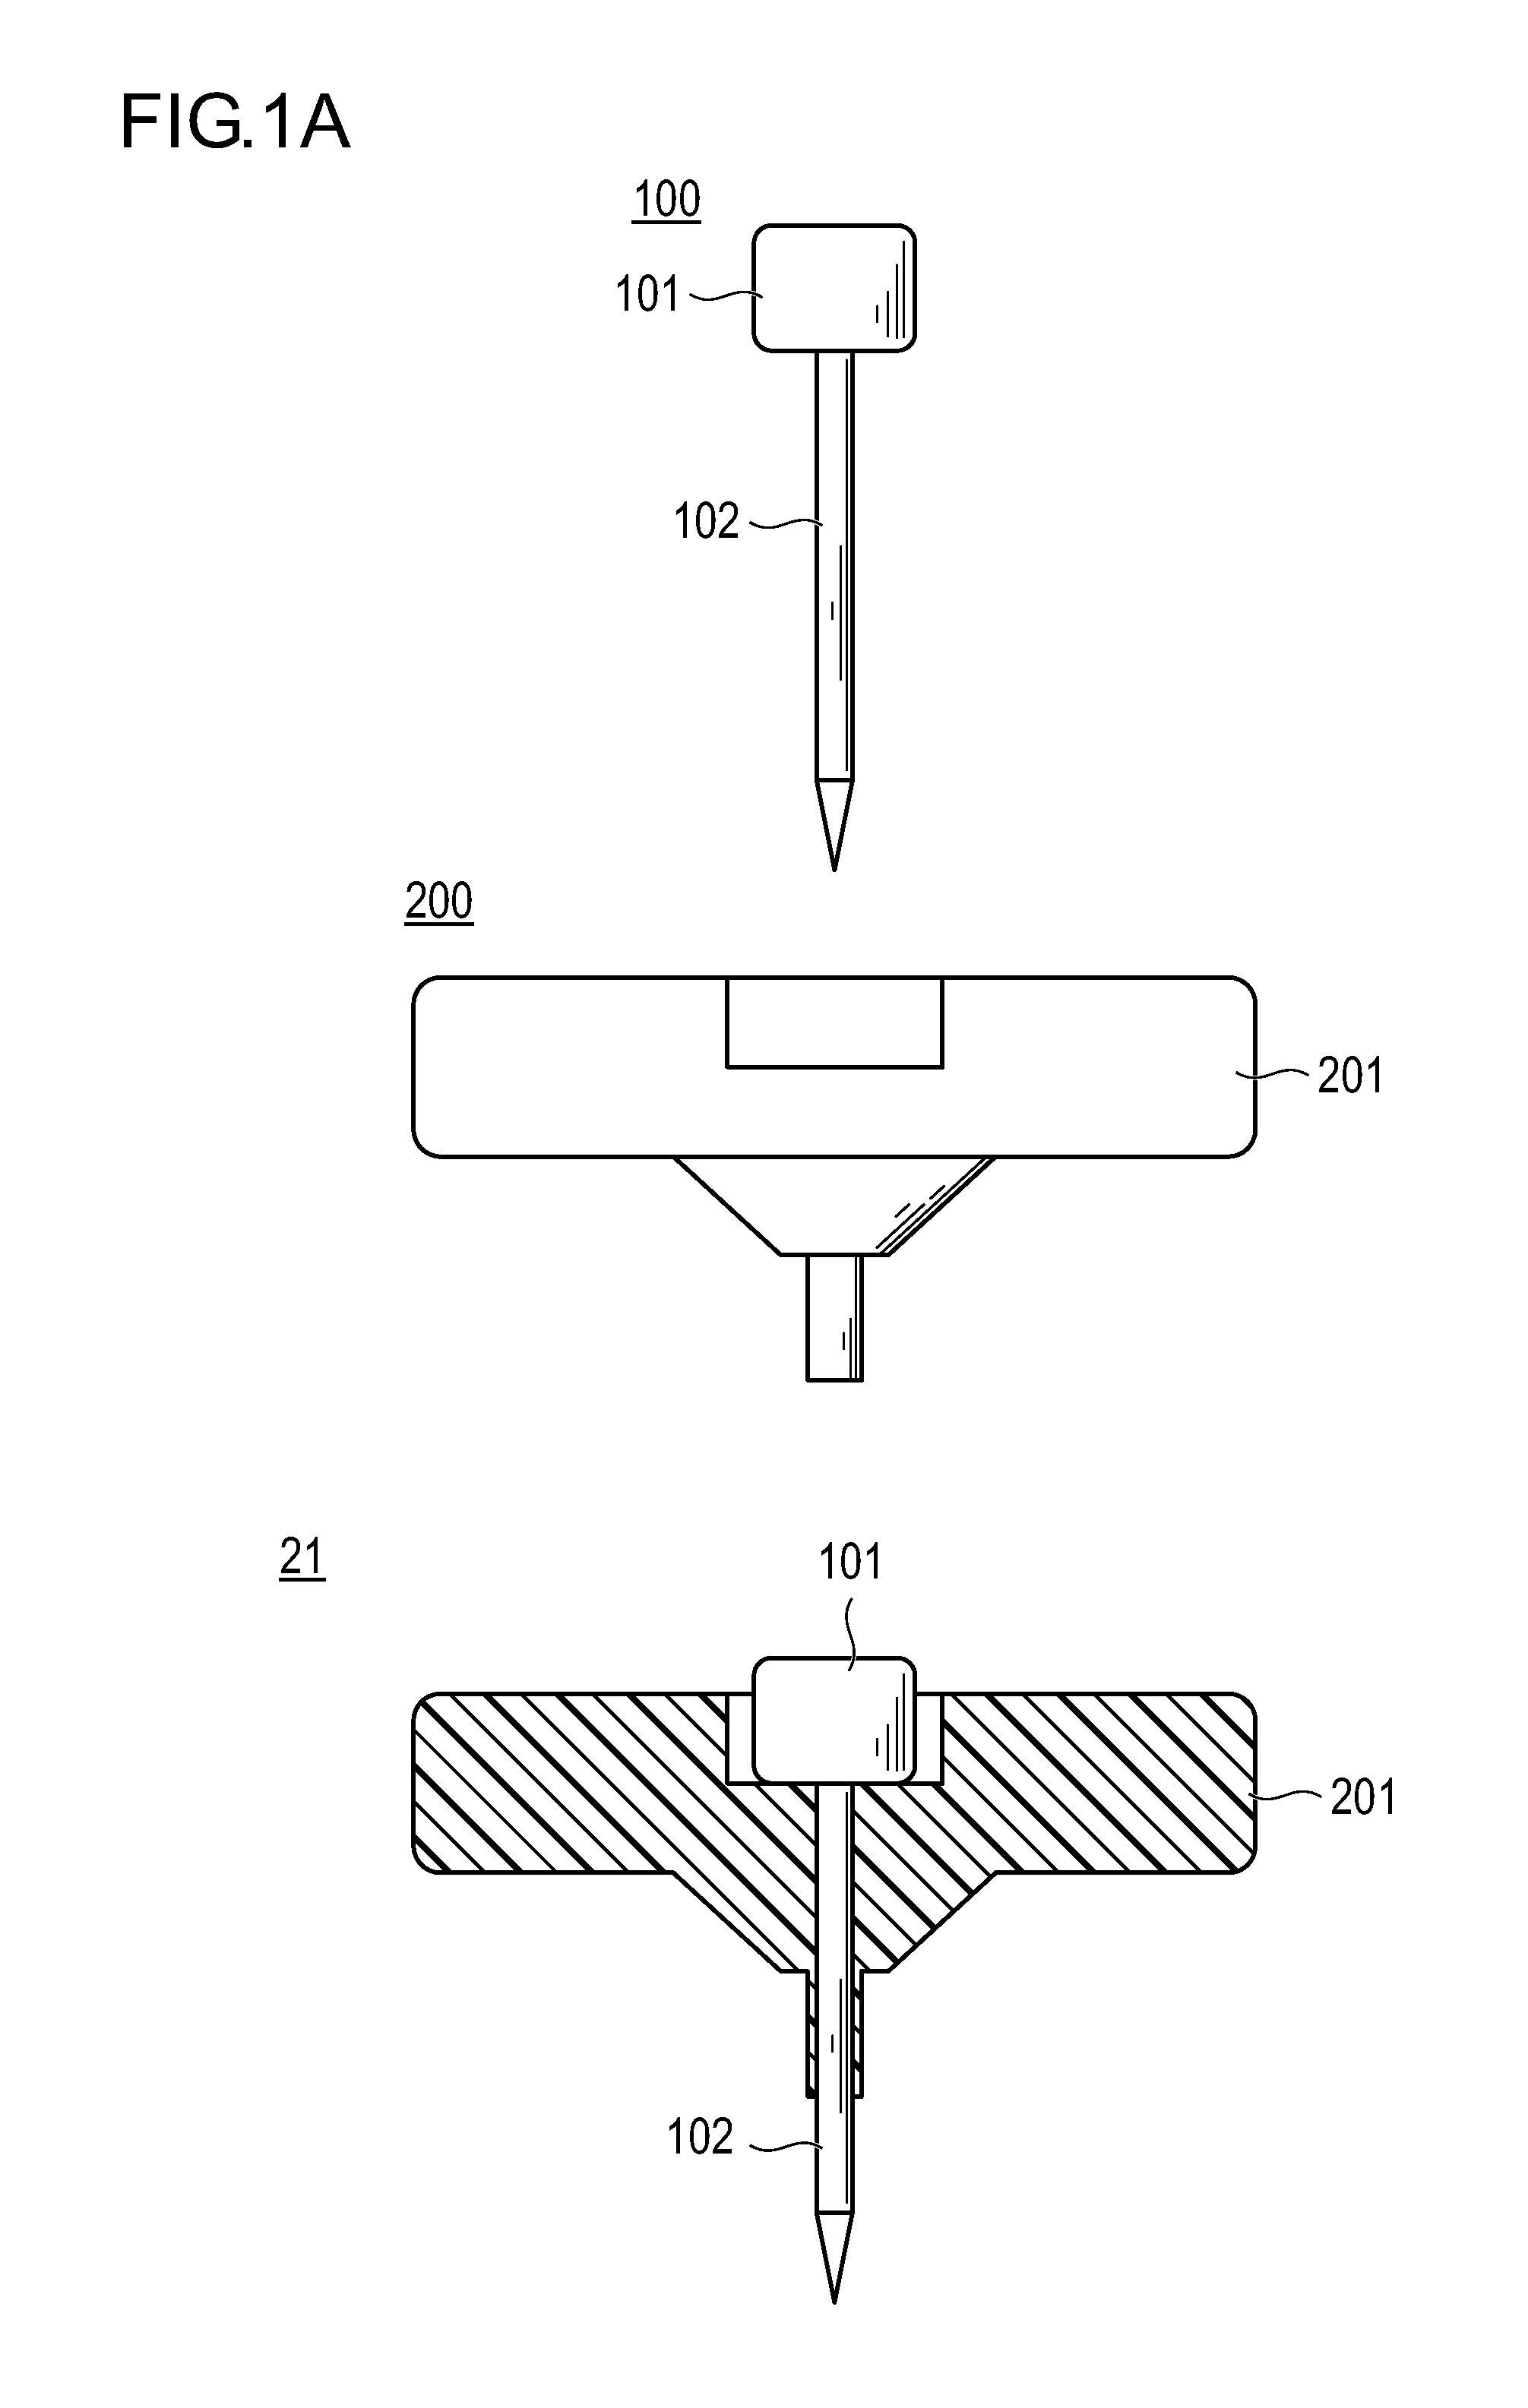 Method for dilating between spinous processes